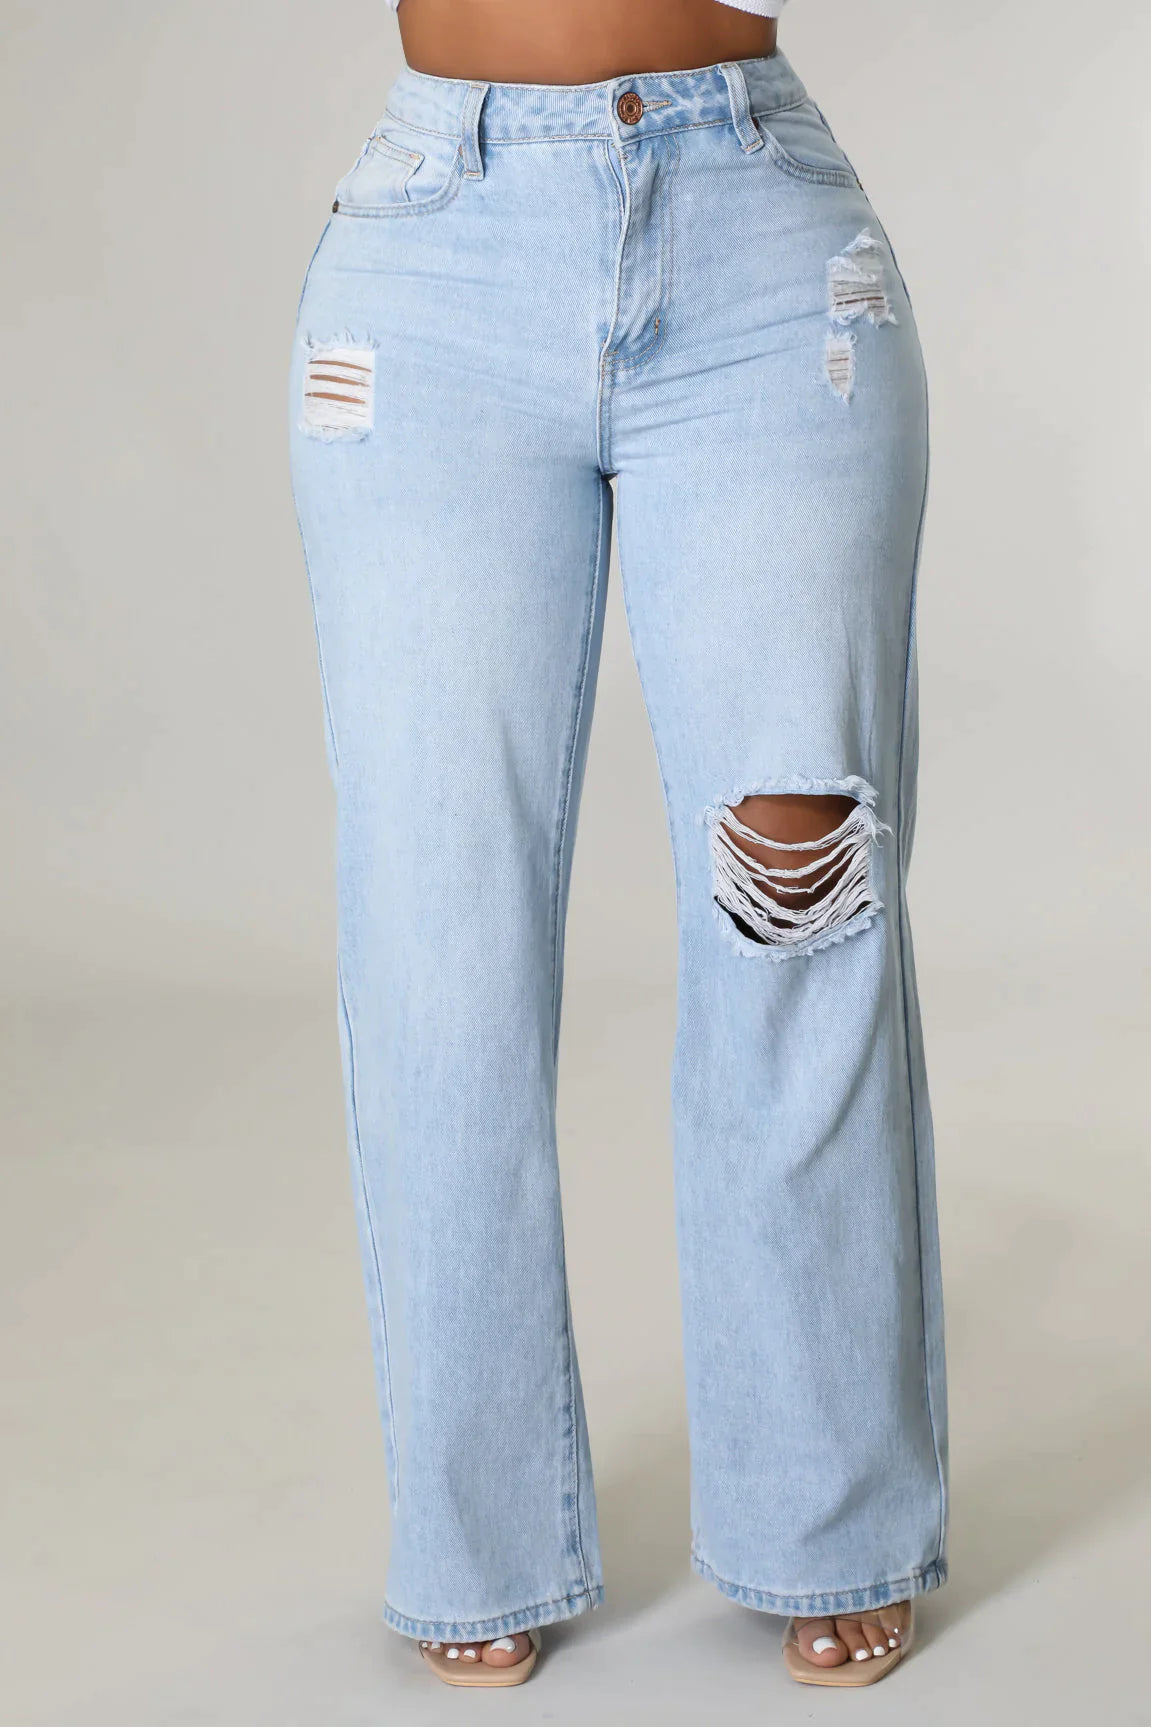 Casual night jeans